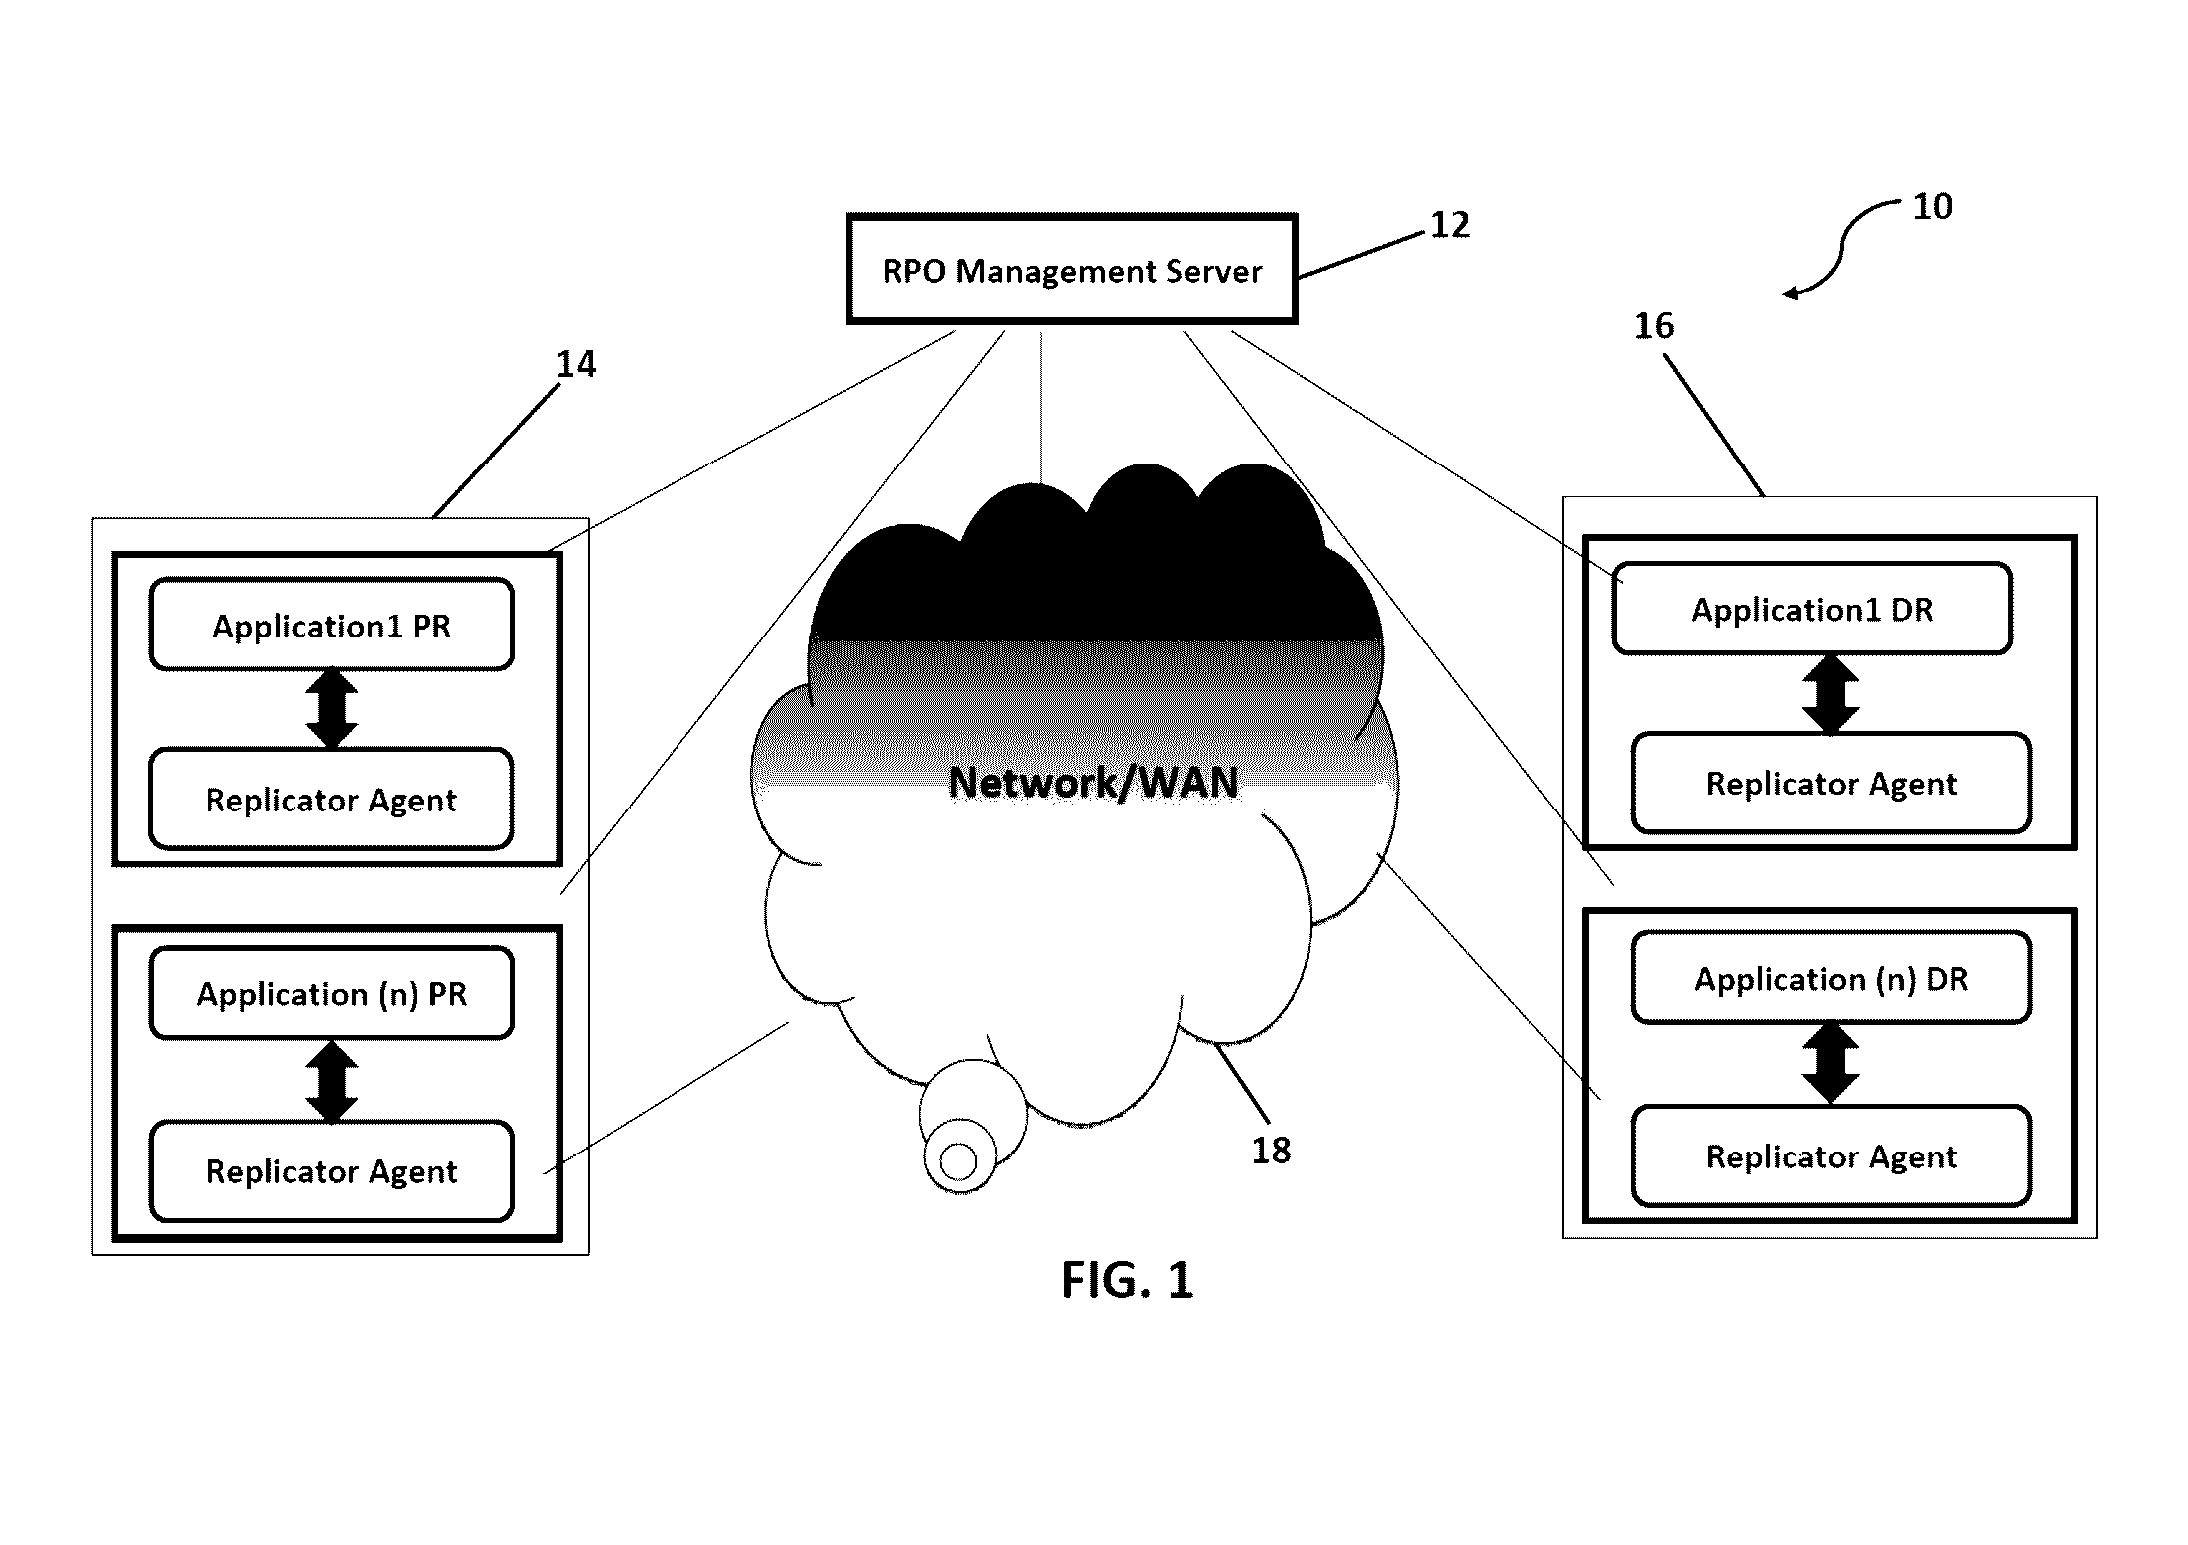 System and method to proactively maintain a consistent recovery point objective (RPO) across data centers